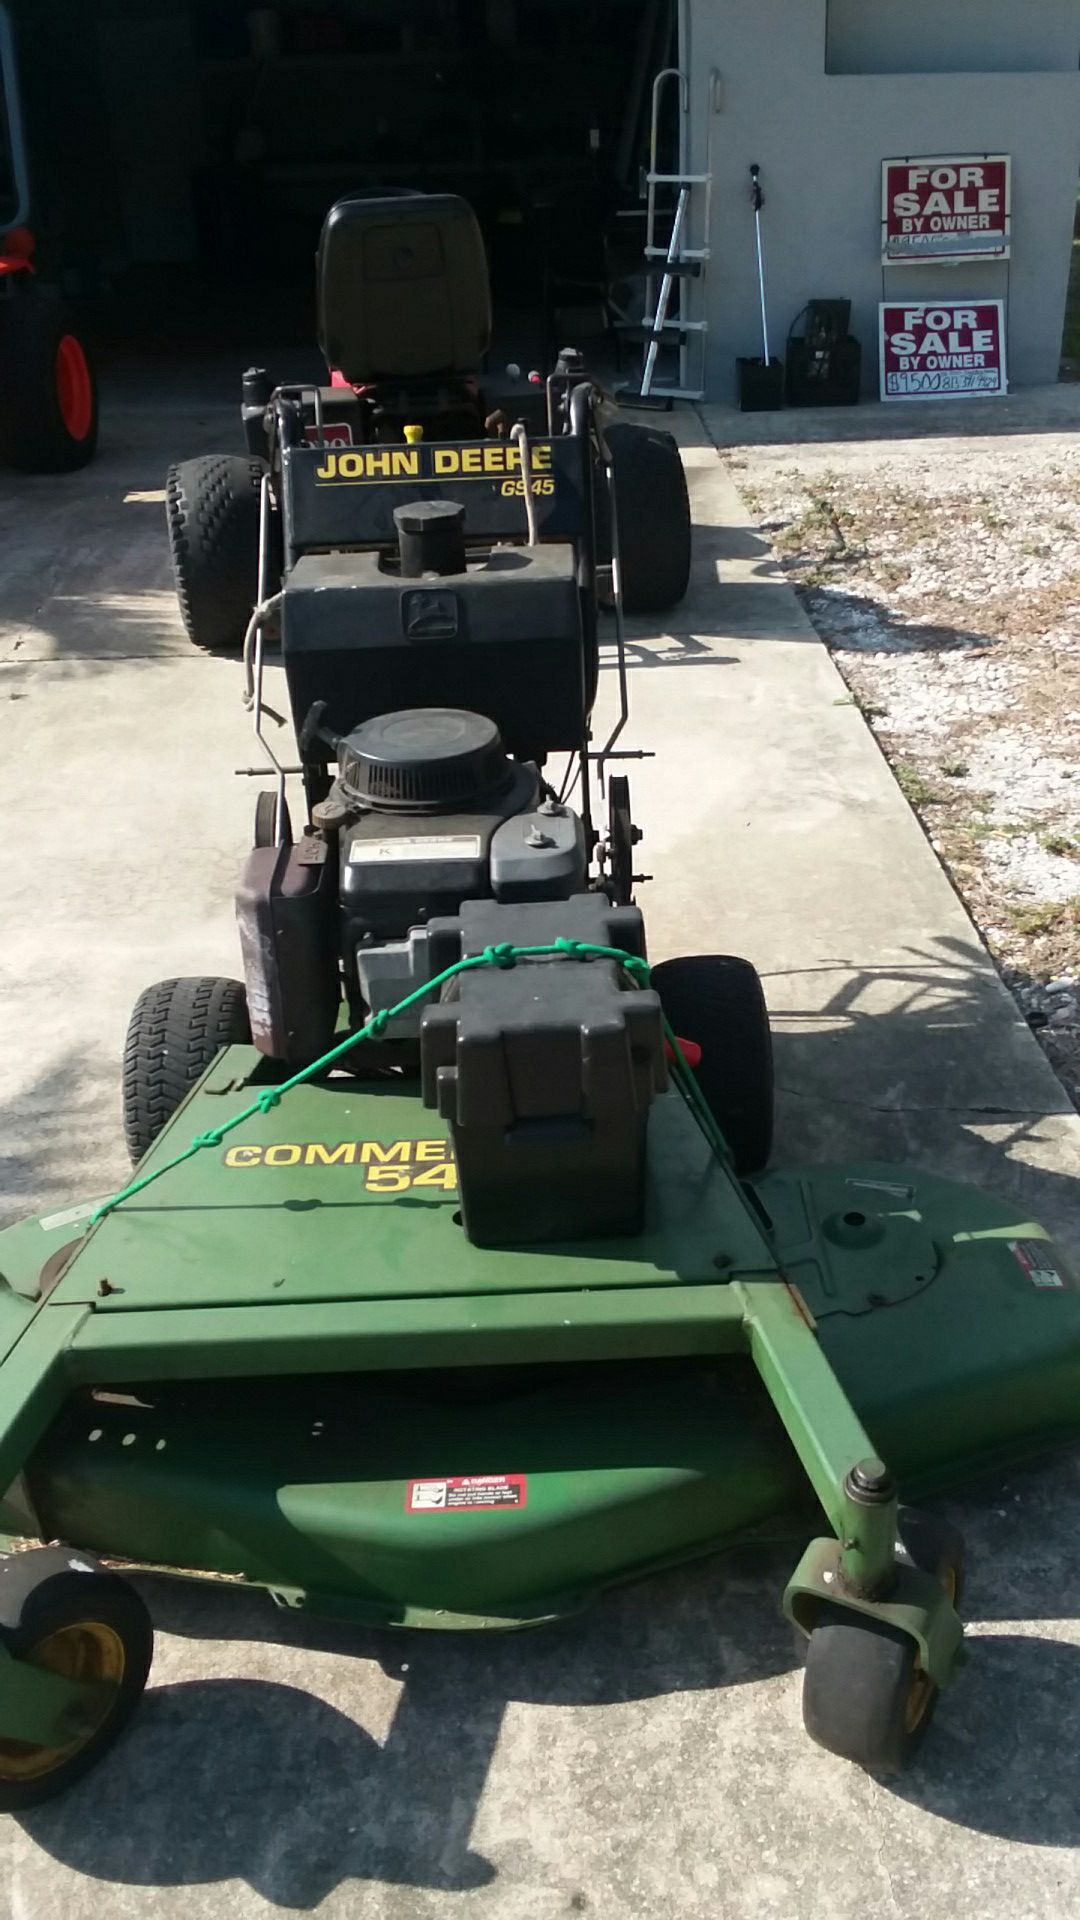 Lawn tractor